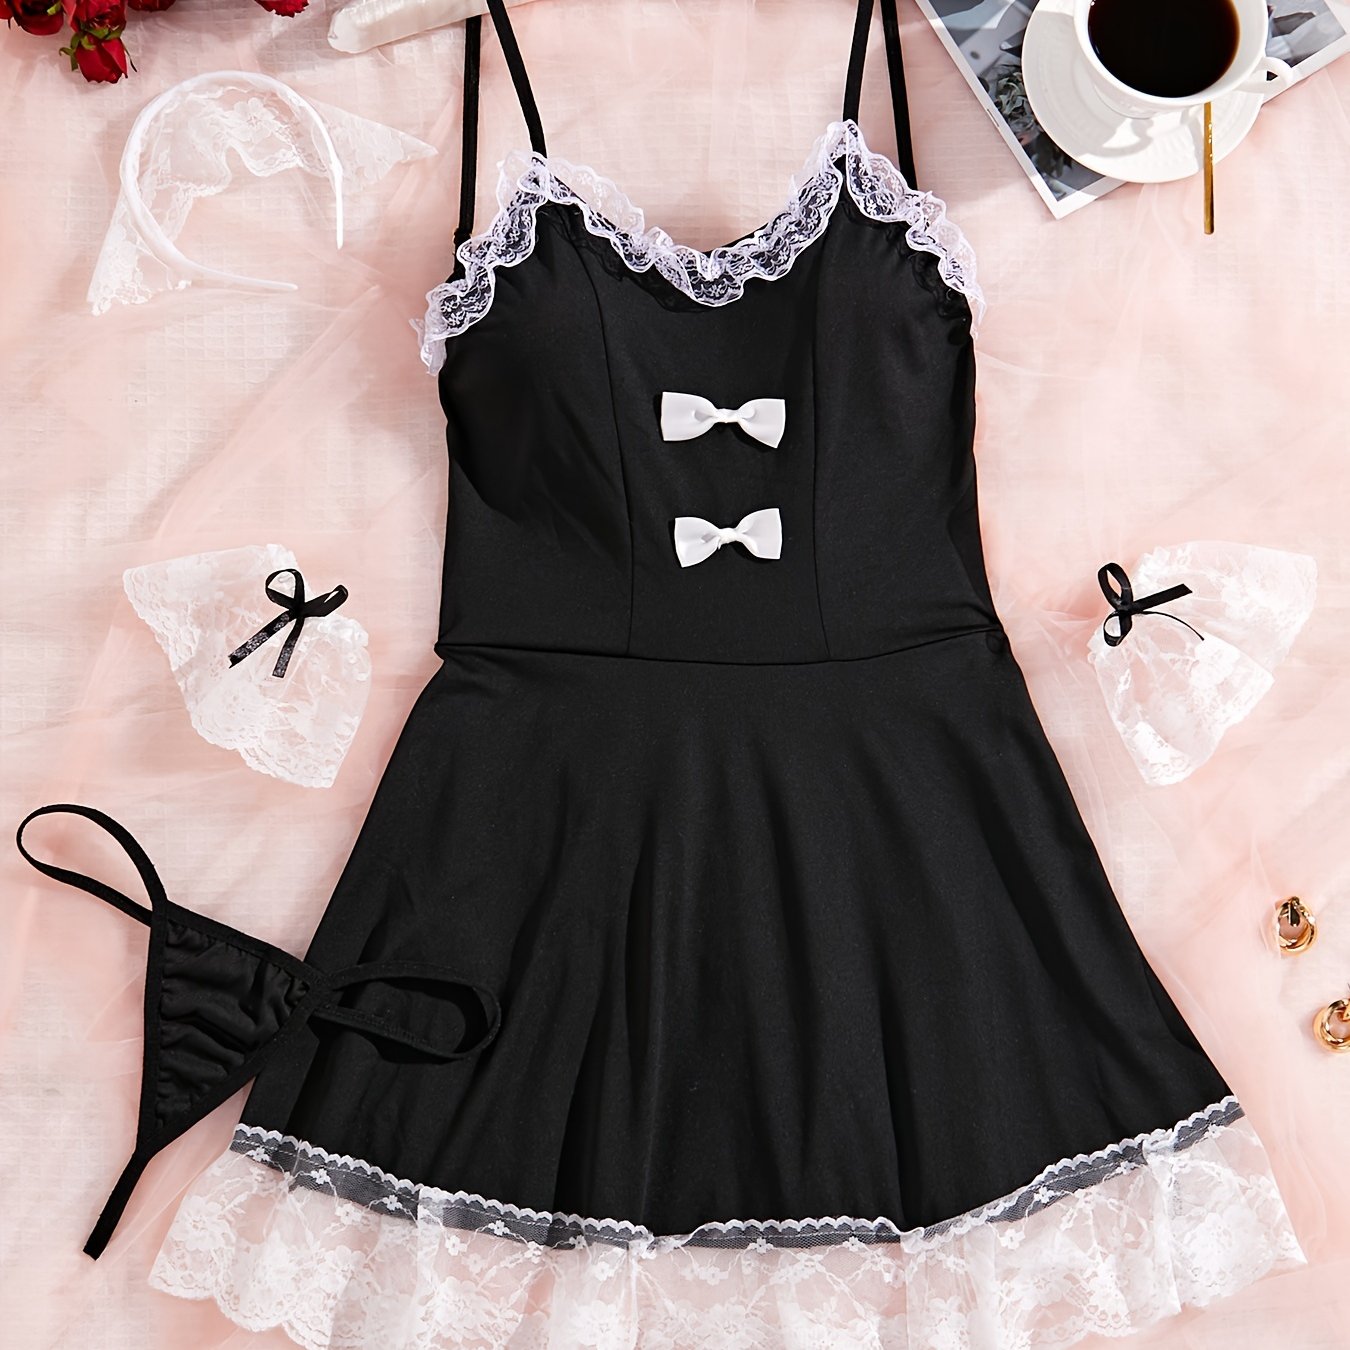 naughty maid role play costume contrast lace bow tie backless slip dress womens sexy lingerie underwear